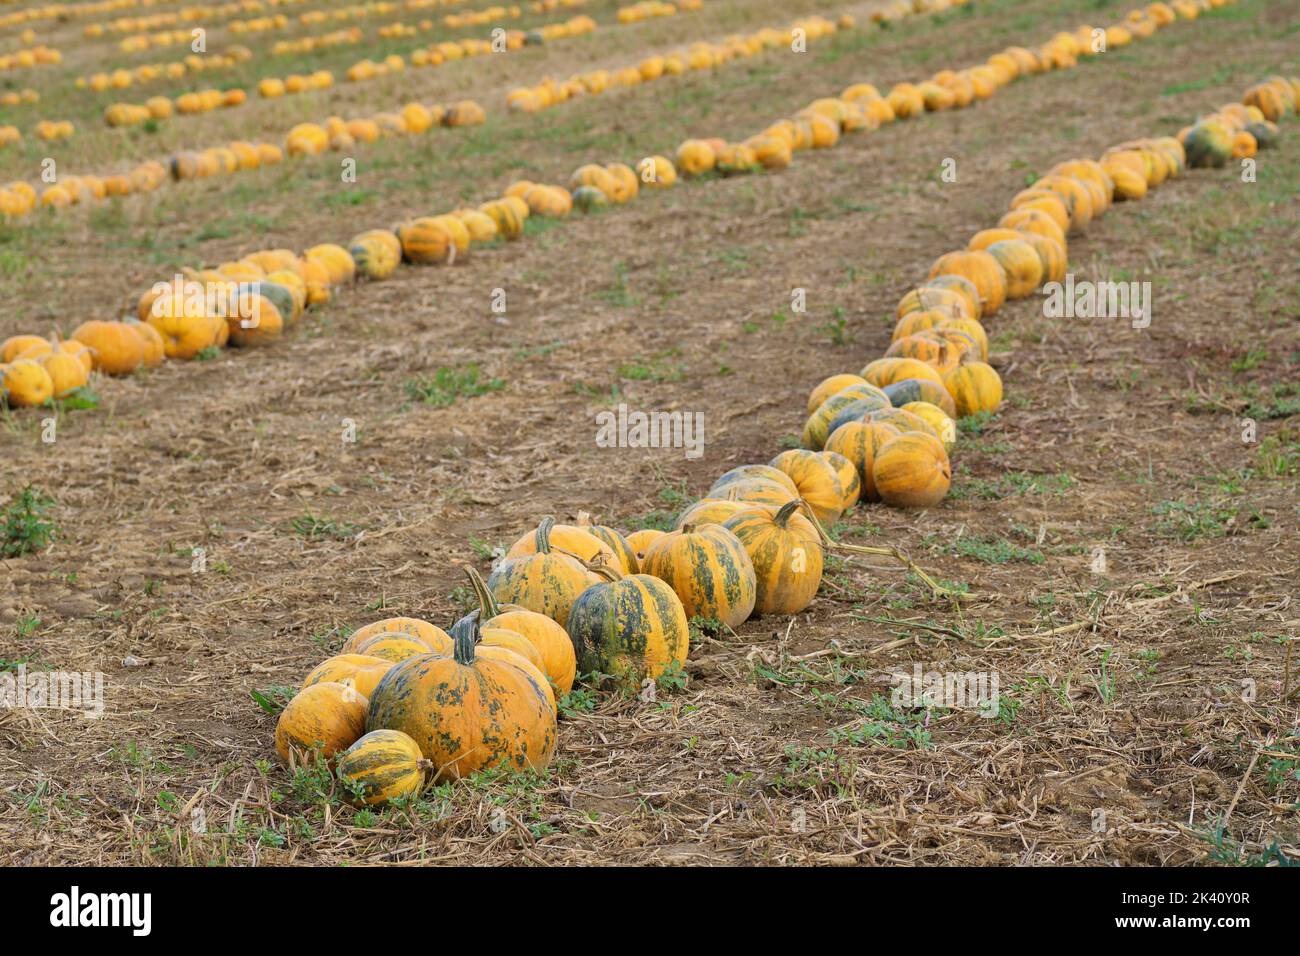 Yellow-green pumpkins stacked in rows in a cultivated agricultural field. Agriculture, farming, food and halloween concepts Stock Photo